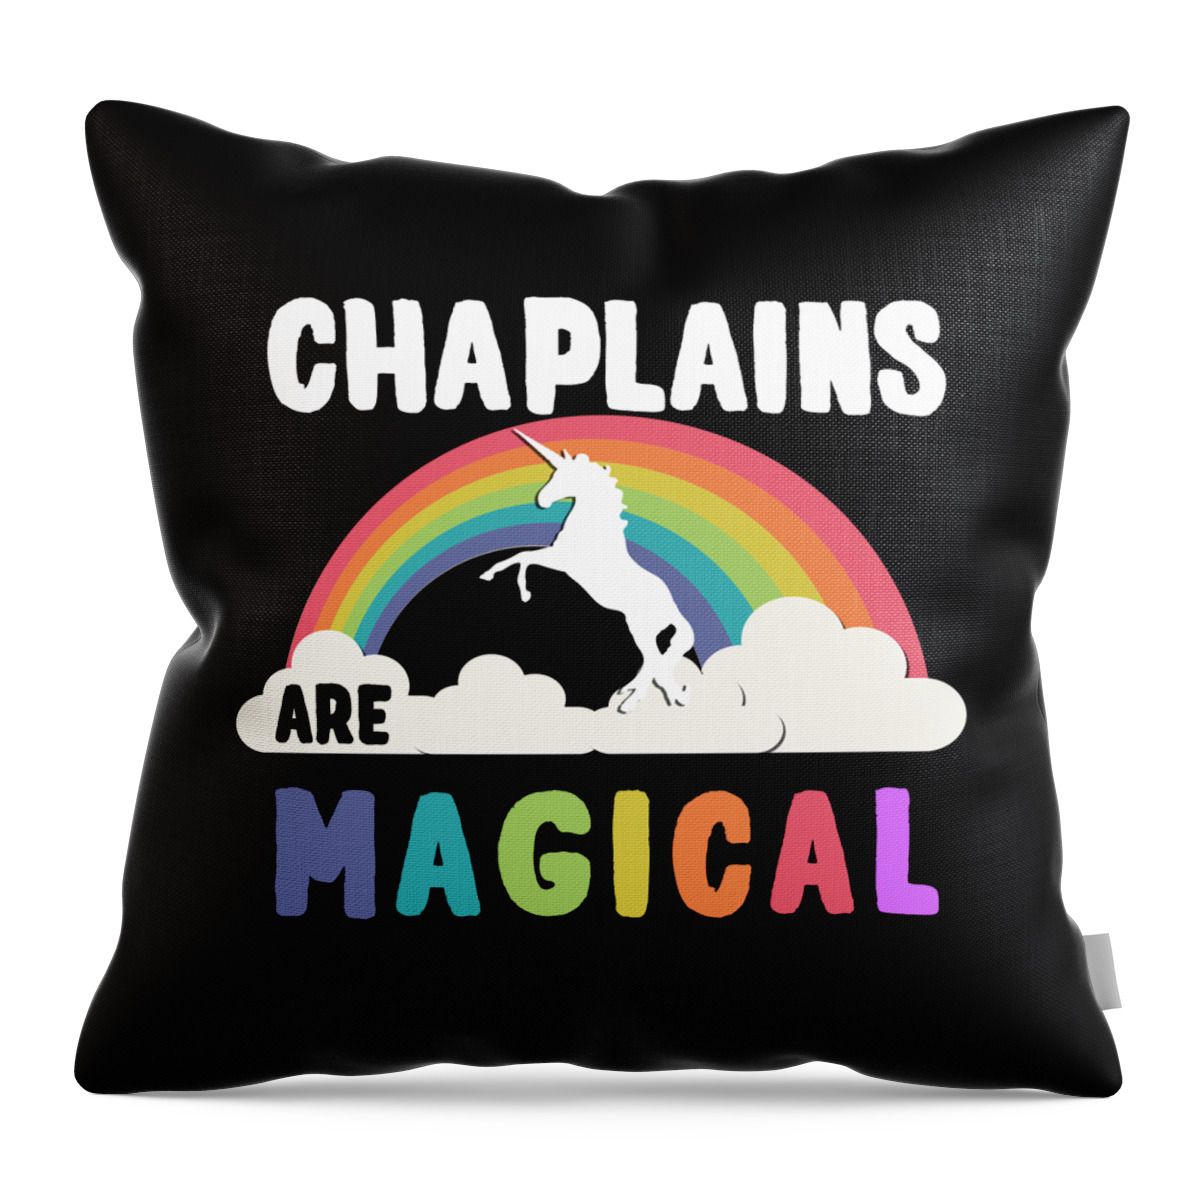 Funny Throw Pillow featuring the digital art Chaplains Are Magical by Flippin Sweet Gear